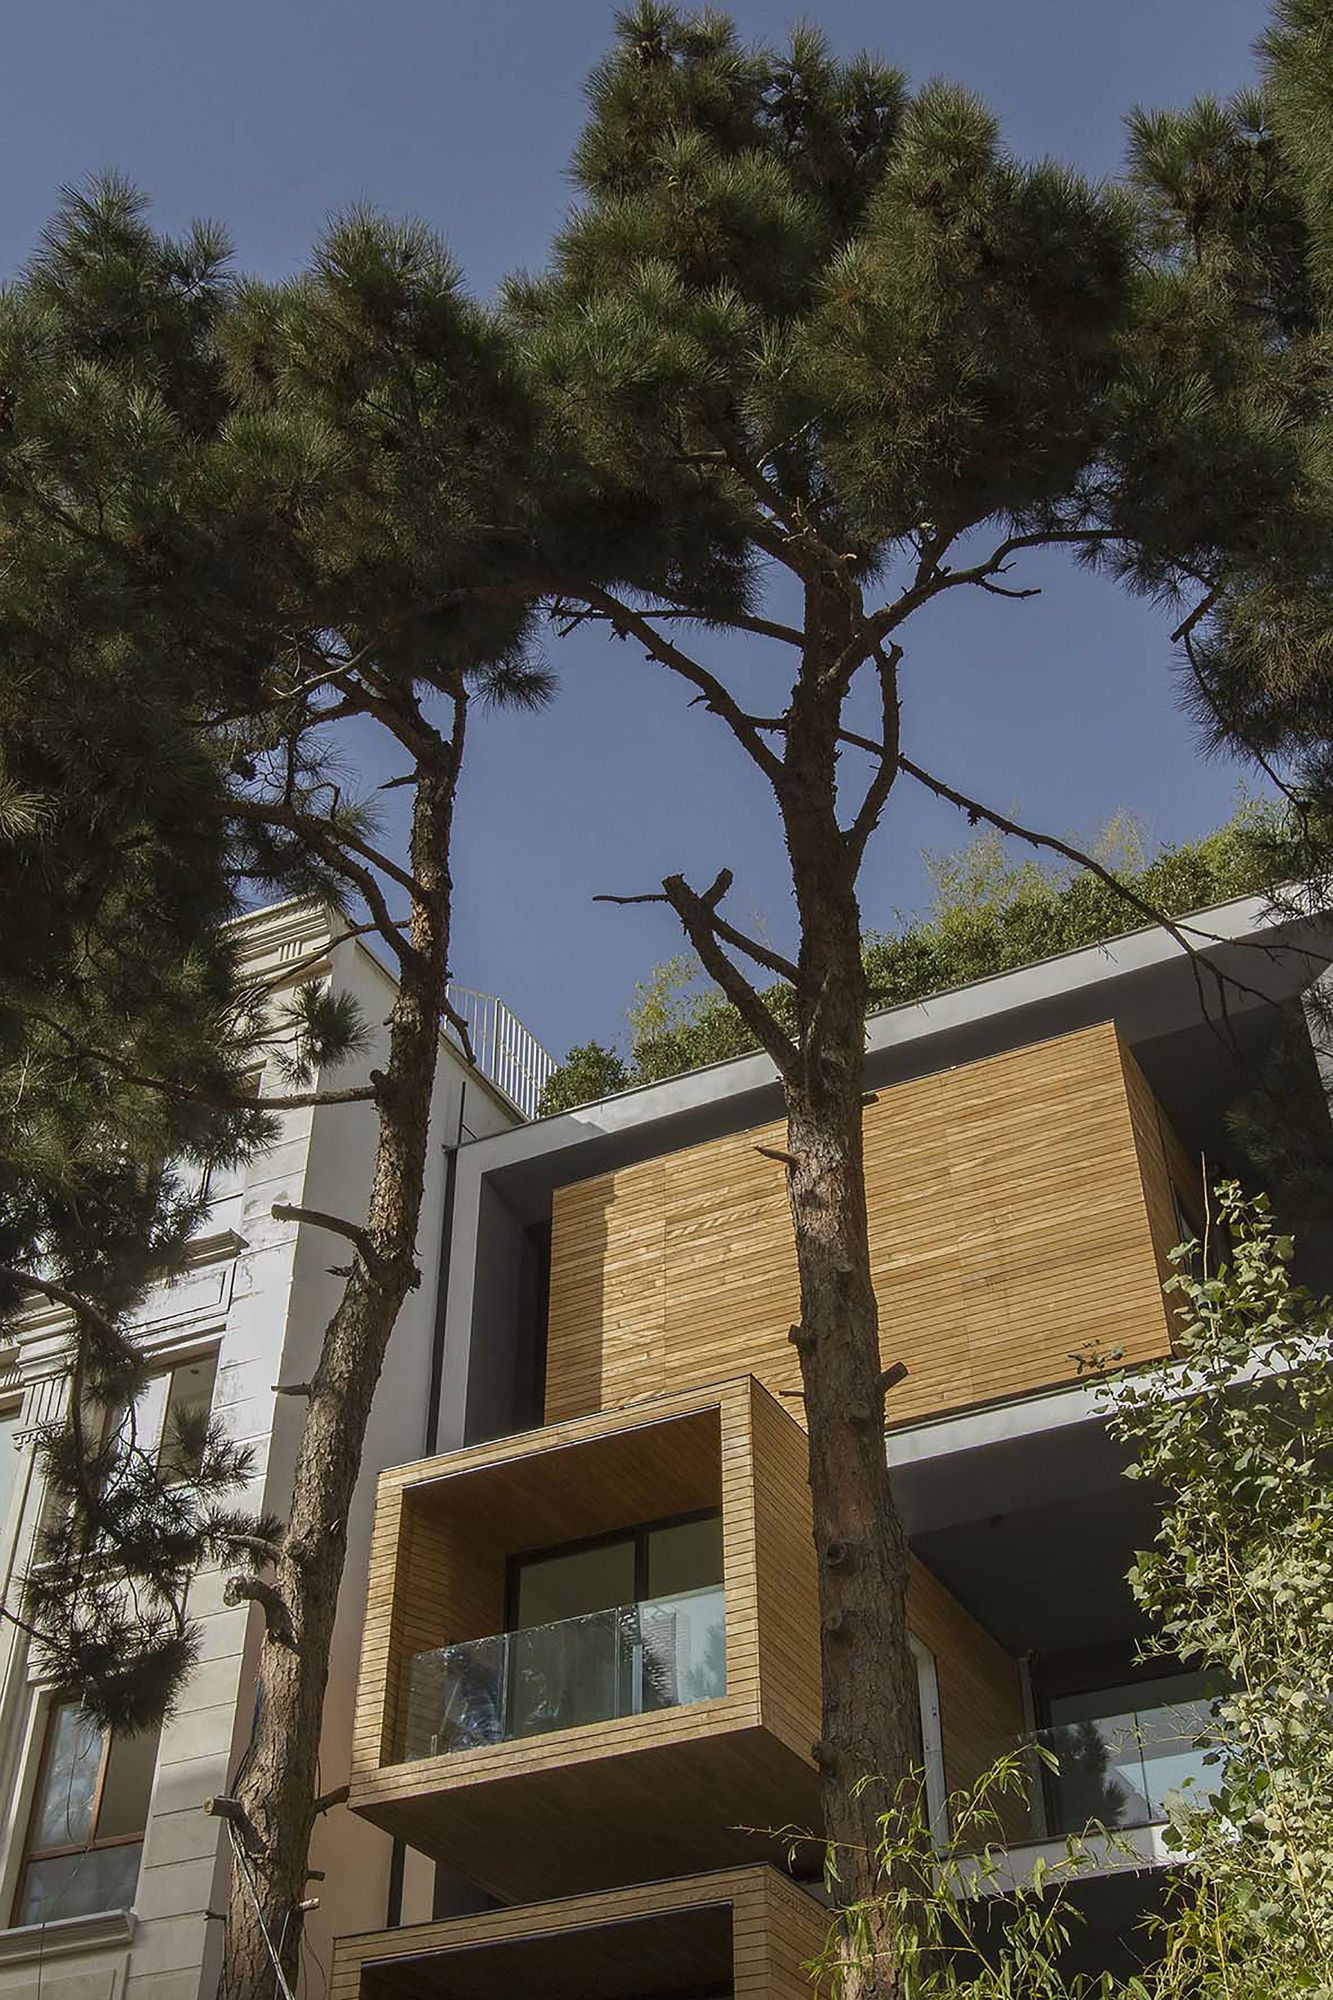 This Clever Transforming House Has Three Rotating Rooms